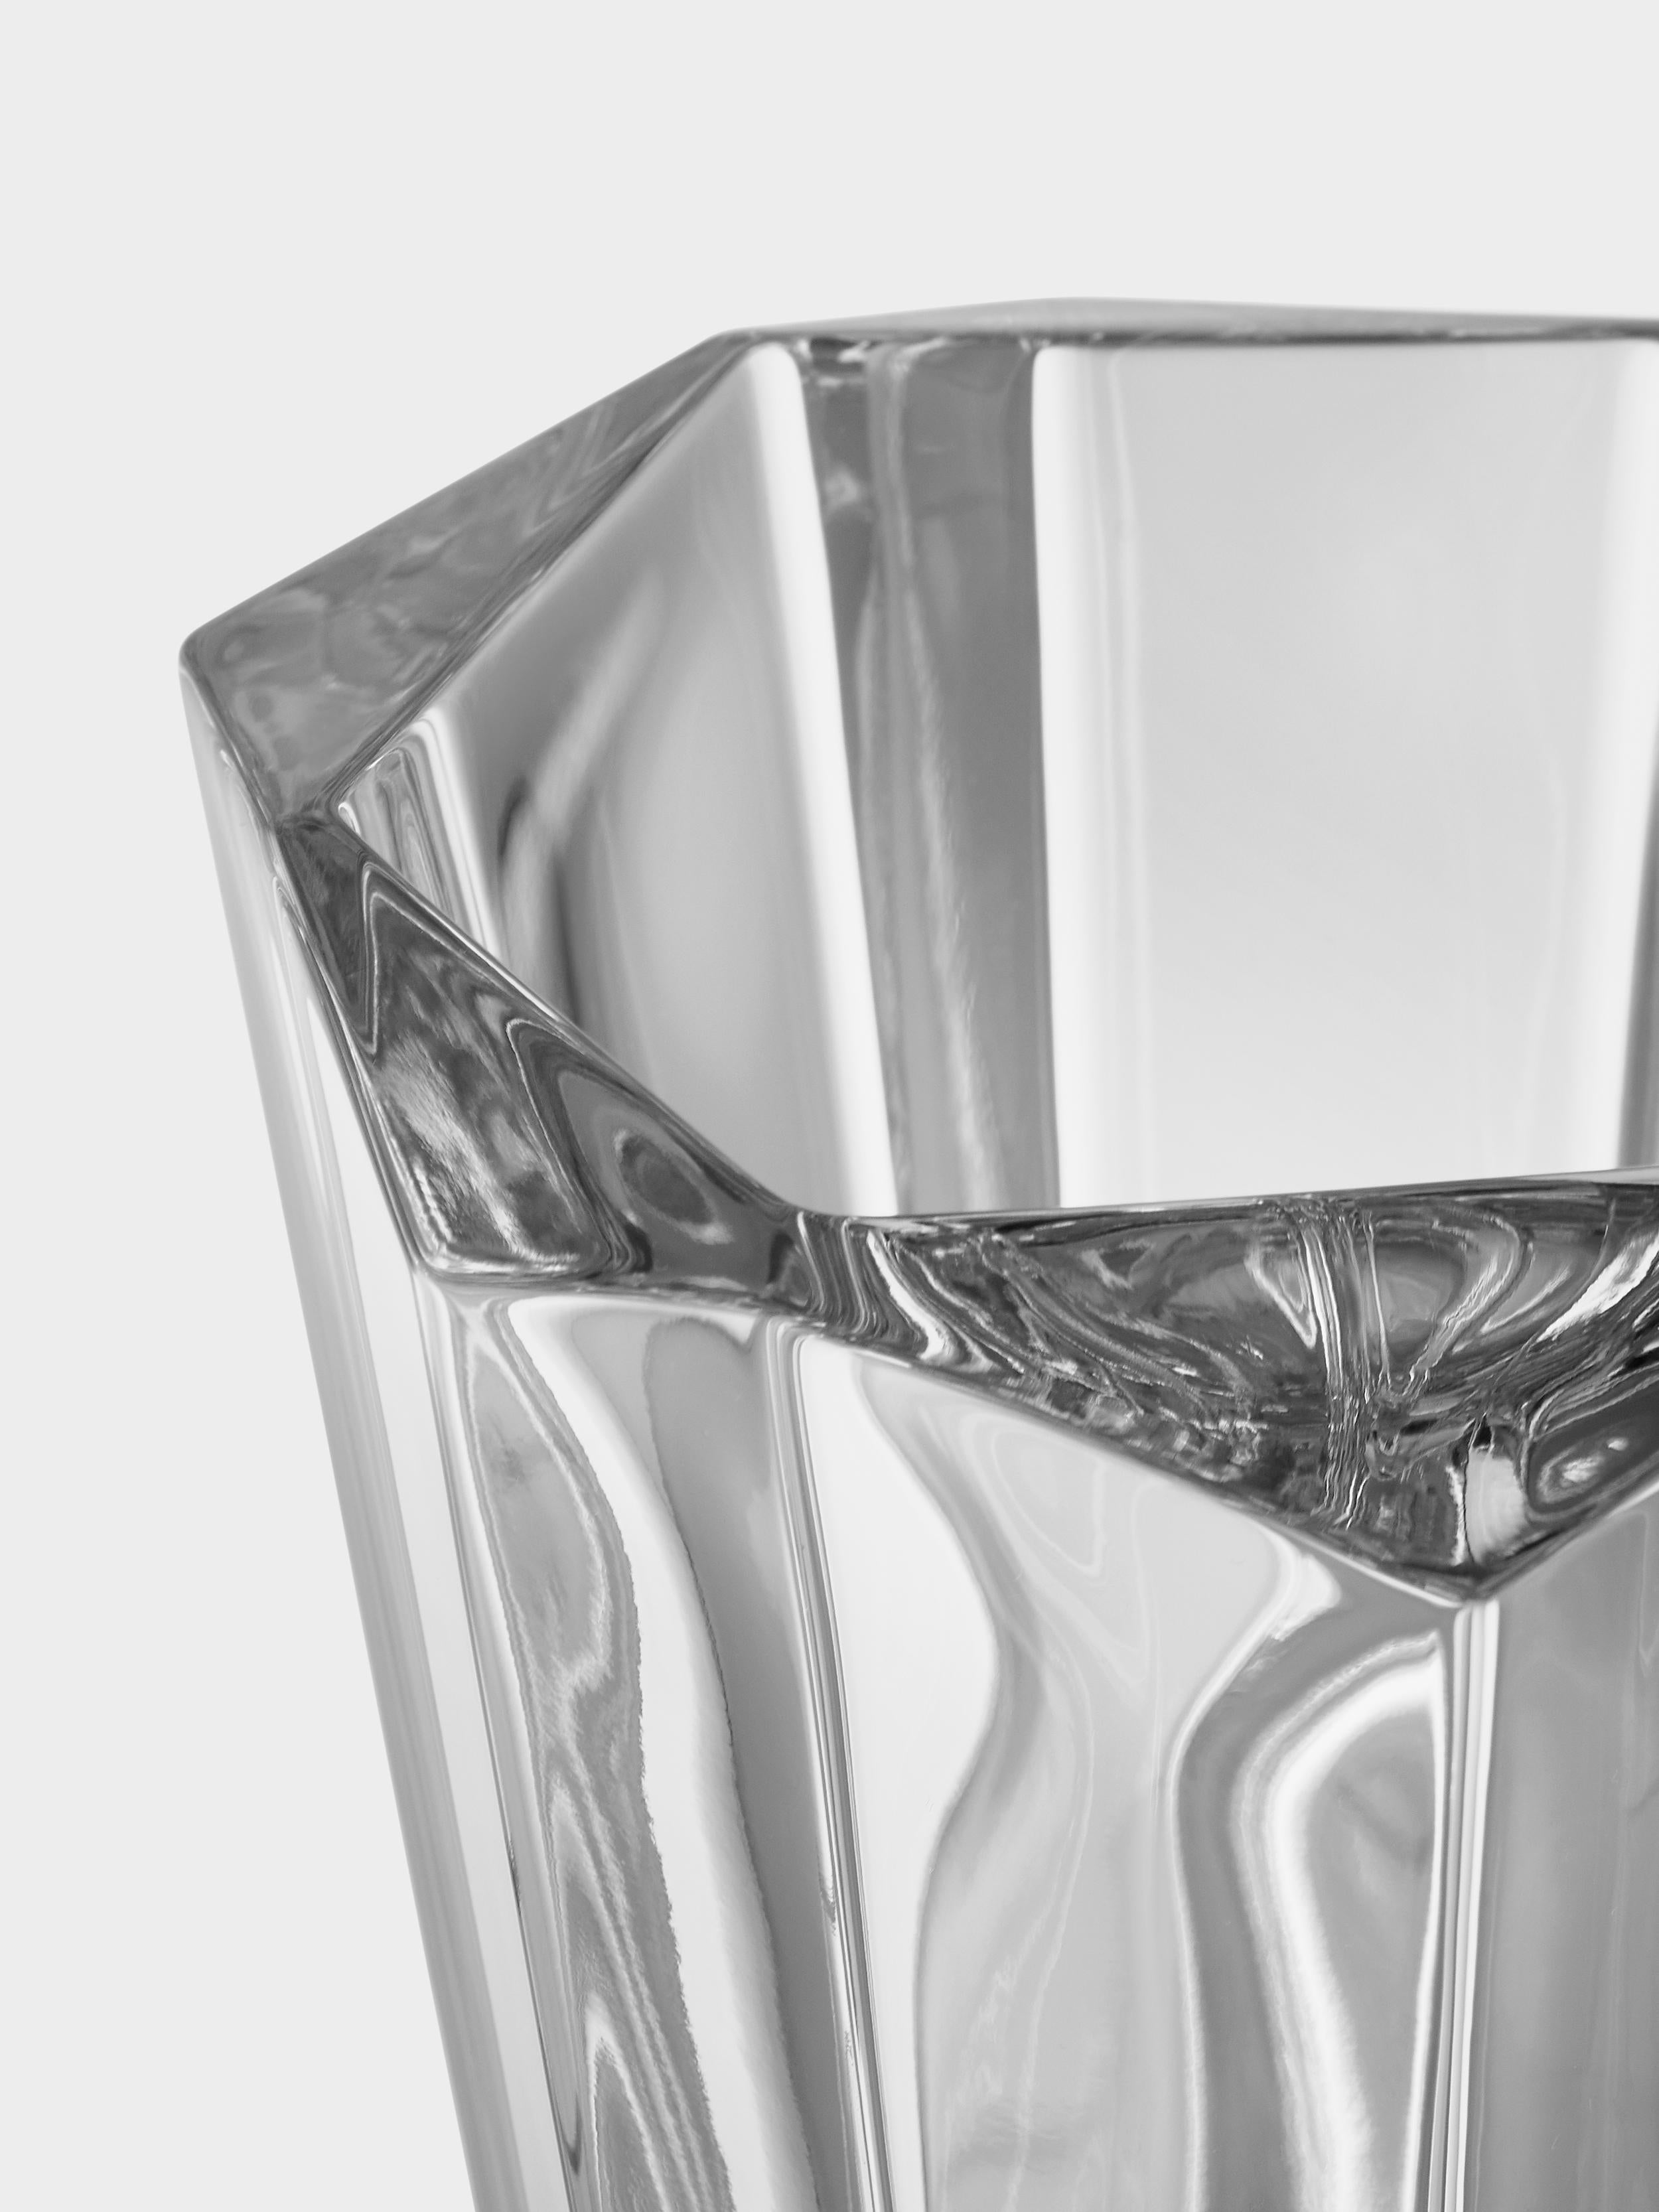 Precious Vase from Orrefors has an asymmetrical design that beautifully refracts the light reflected in the thick crystal. The large vase is a decorative centerpiece delivering an elegant feel to the home. Complement it with a bouquet of choice.